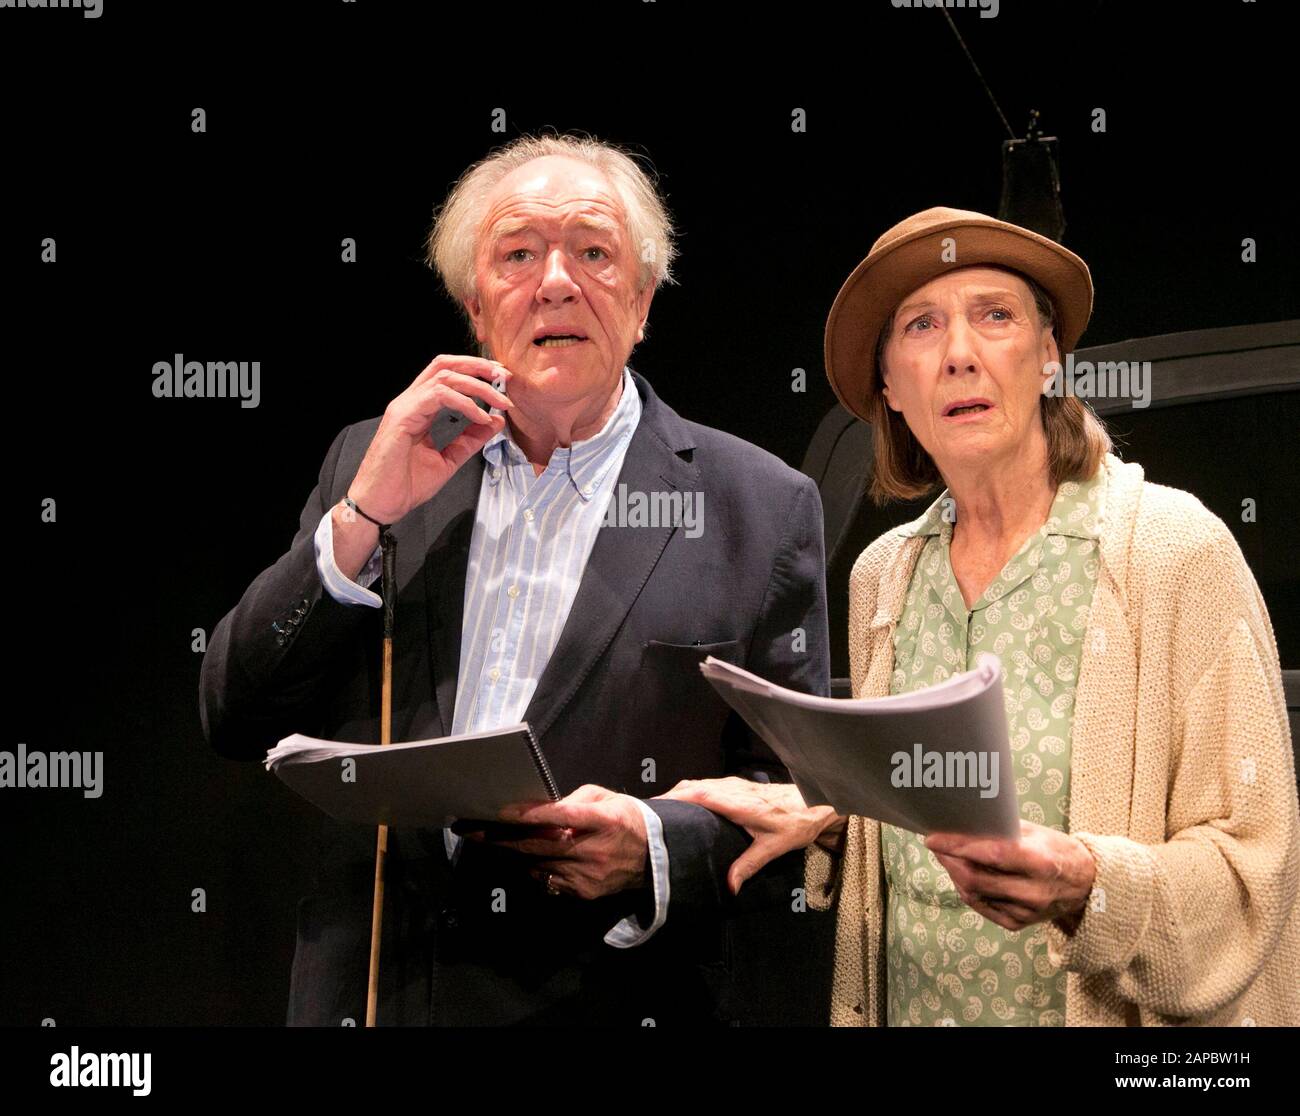 Michael Gambon (Mr Rooney) with Eileen Atkins (Mrs Rooney) in ALL THAT FALL by Samuel Beckett directed by Trevor Nunn at the Jermyn Street Theatre, London SW1 in 2012 Michael John Gambon, born in Cabra, Dublin in 1940, moved to London at the age of 6 and became a British citizen. Knighted in 1998. Multi-award-winner, including 3 Oliviers and 4 BAFTAs. Stock Photo